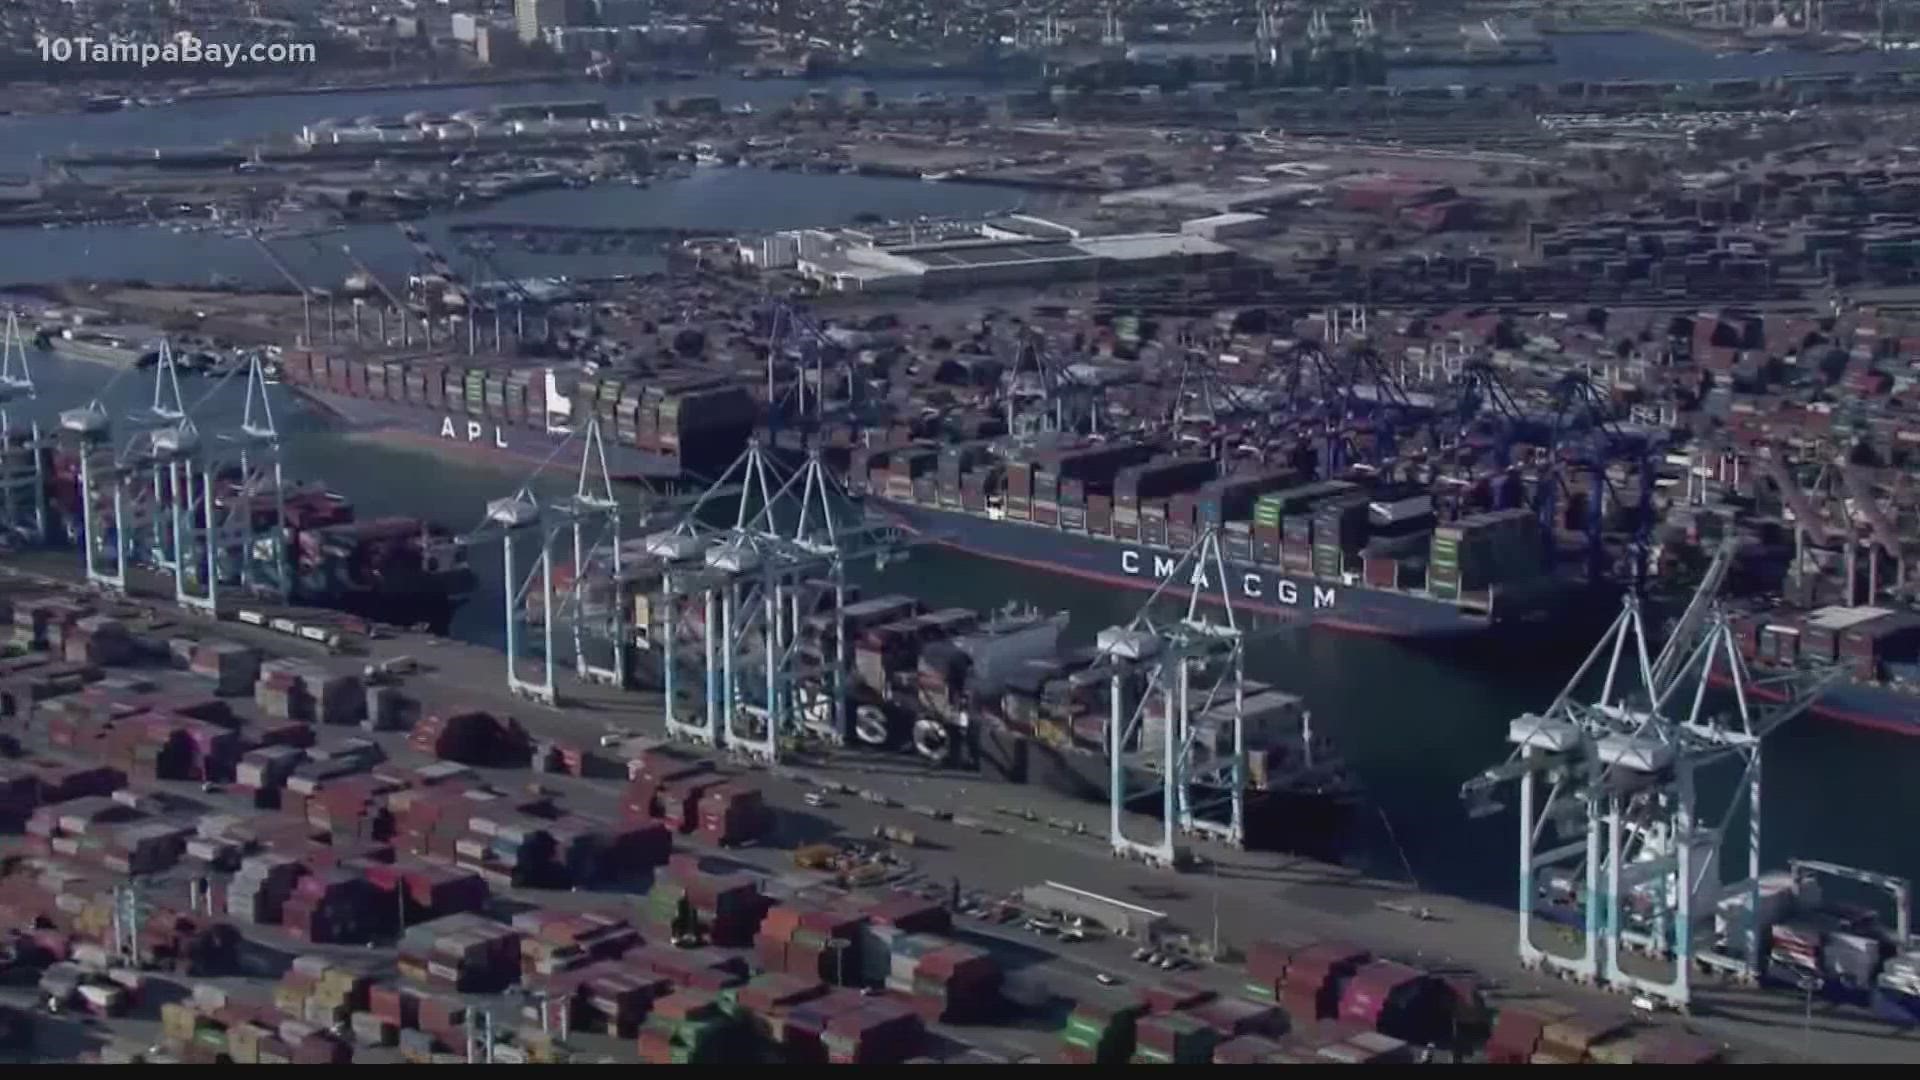 Cargo ships are stuck at sea, some have been there for months. On Wednesday there were nearly 60 cargo ships are stuck floating outside the ports of Los Angeles